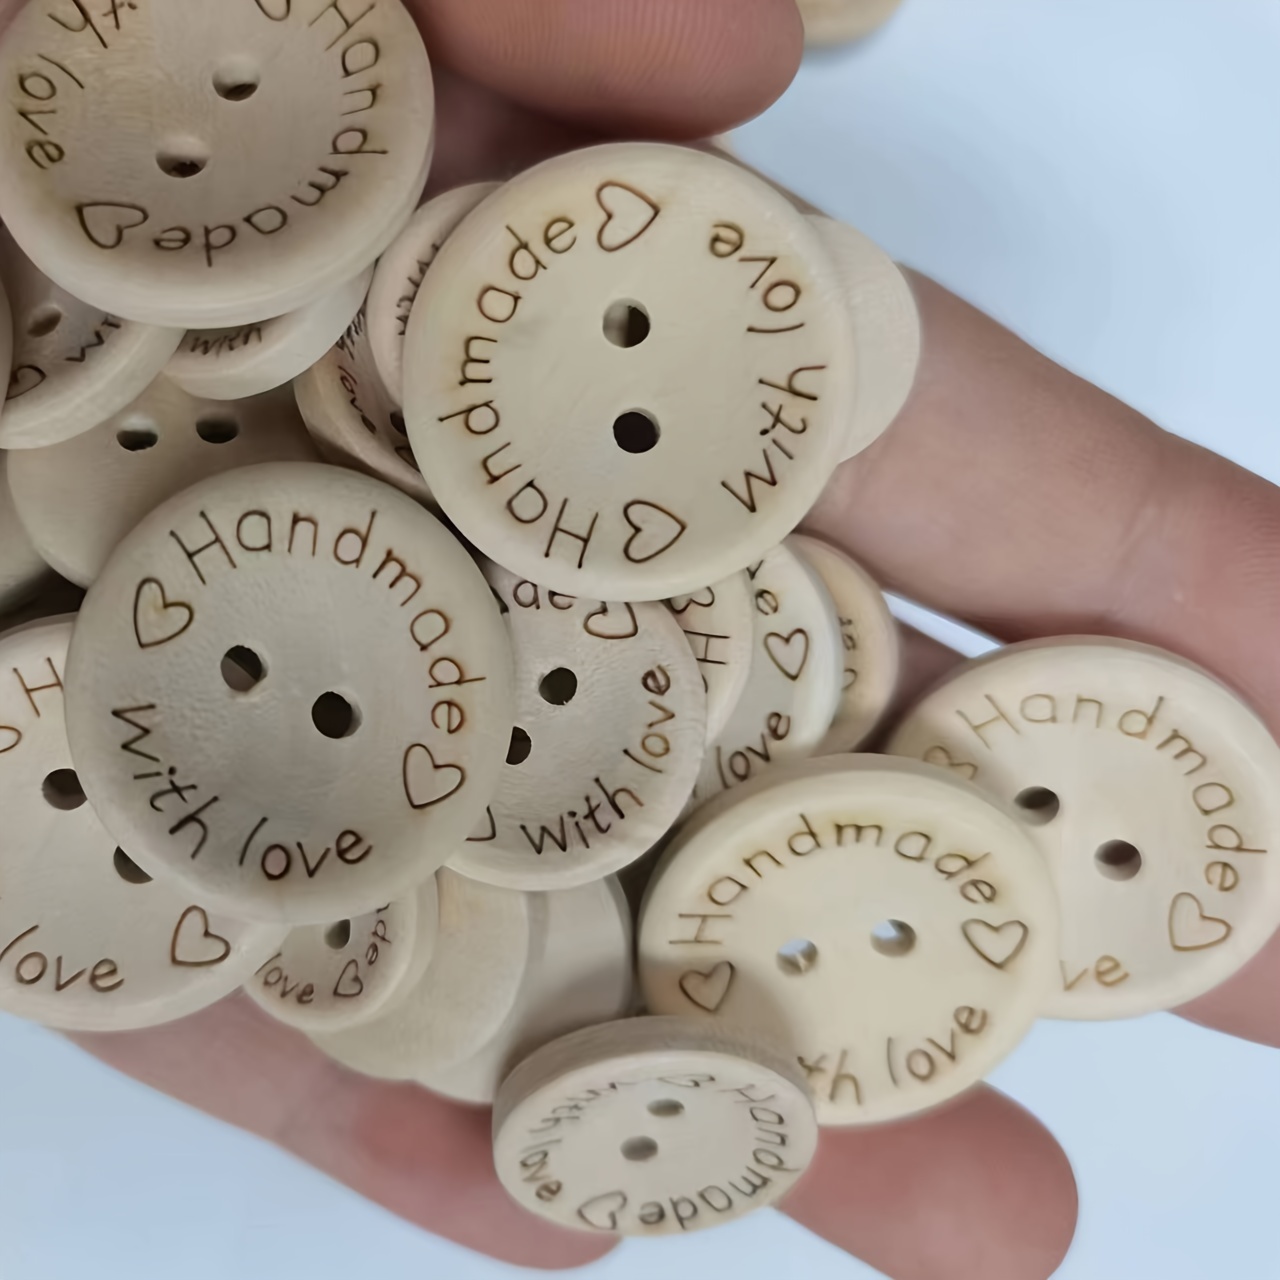 100pcs 3/4inch Wooden Buttons for Crafts 2 Holes Round Shape Wooden Handmade with Love Buttons Wooden Buttons for Sewing Clothing Accessories DIY